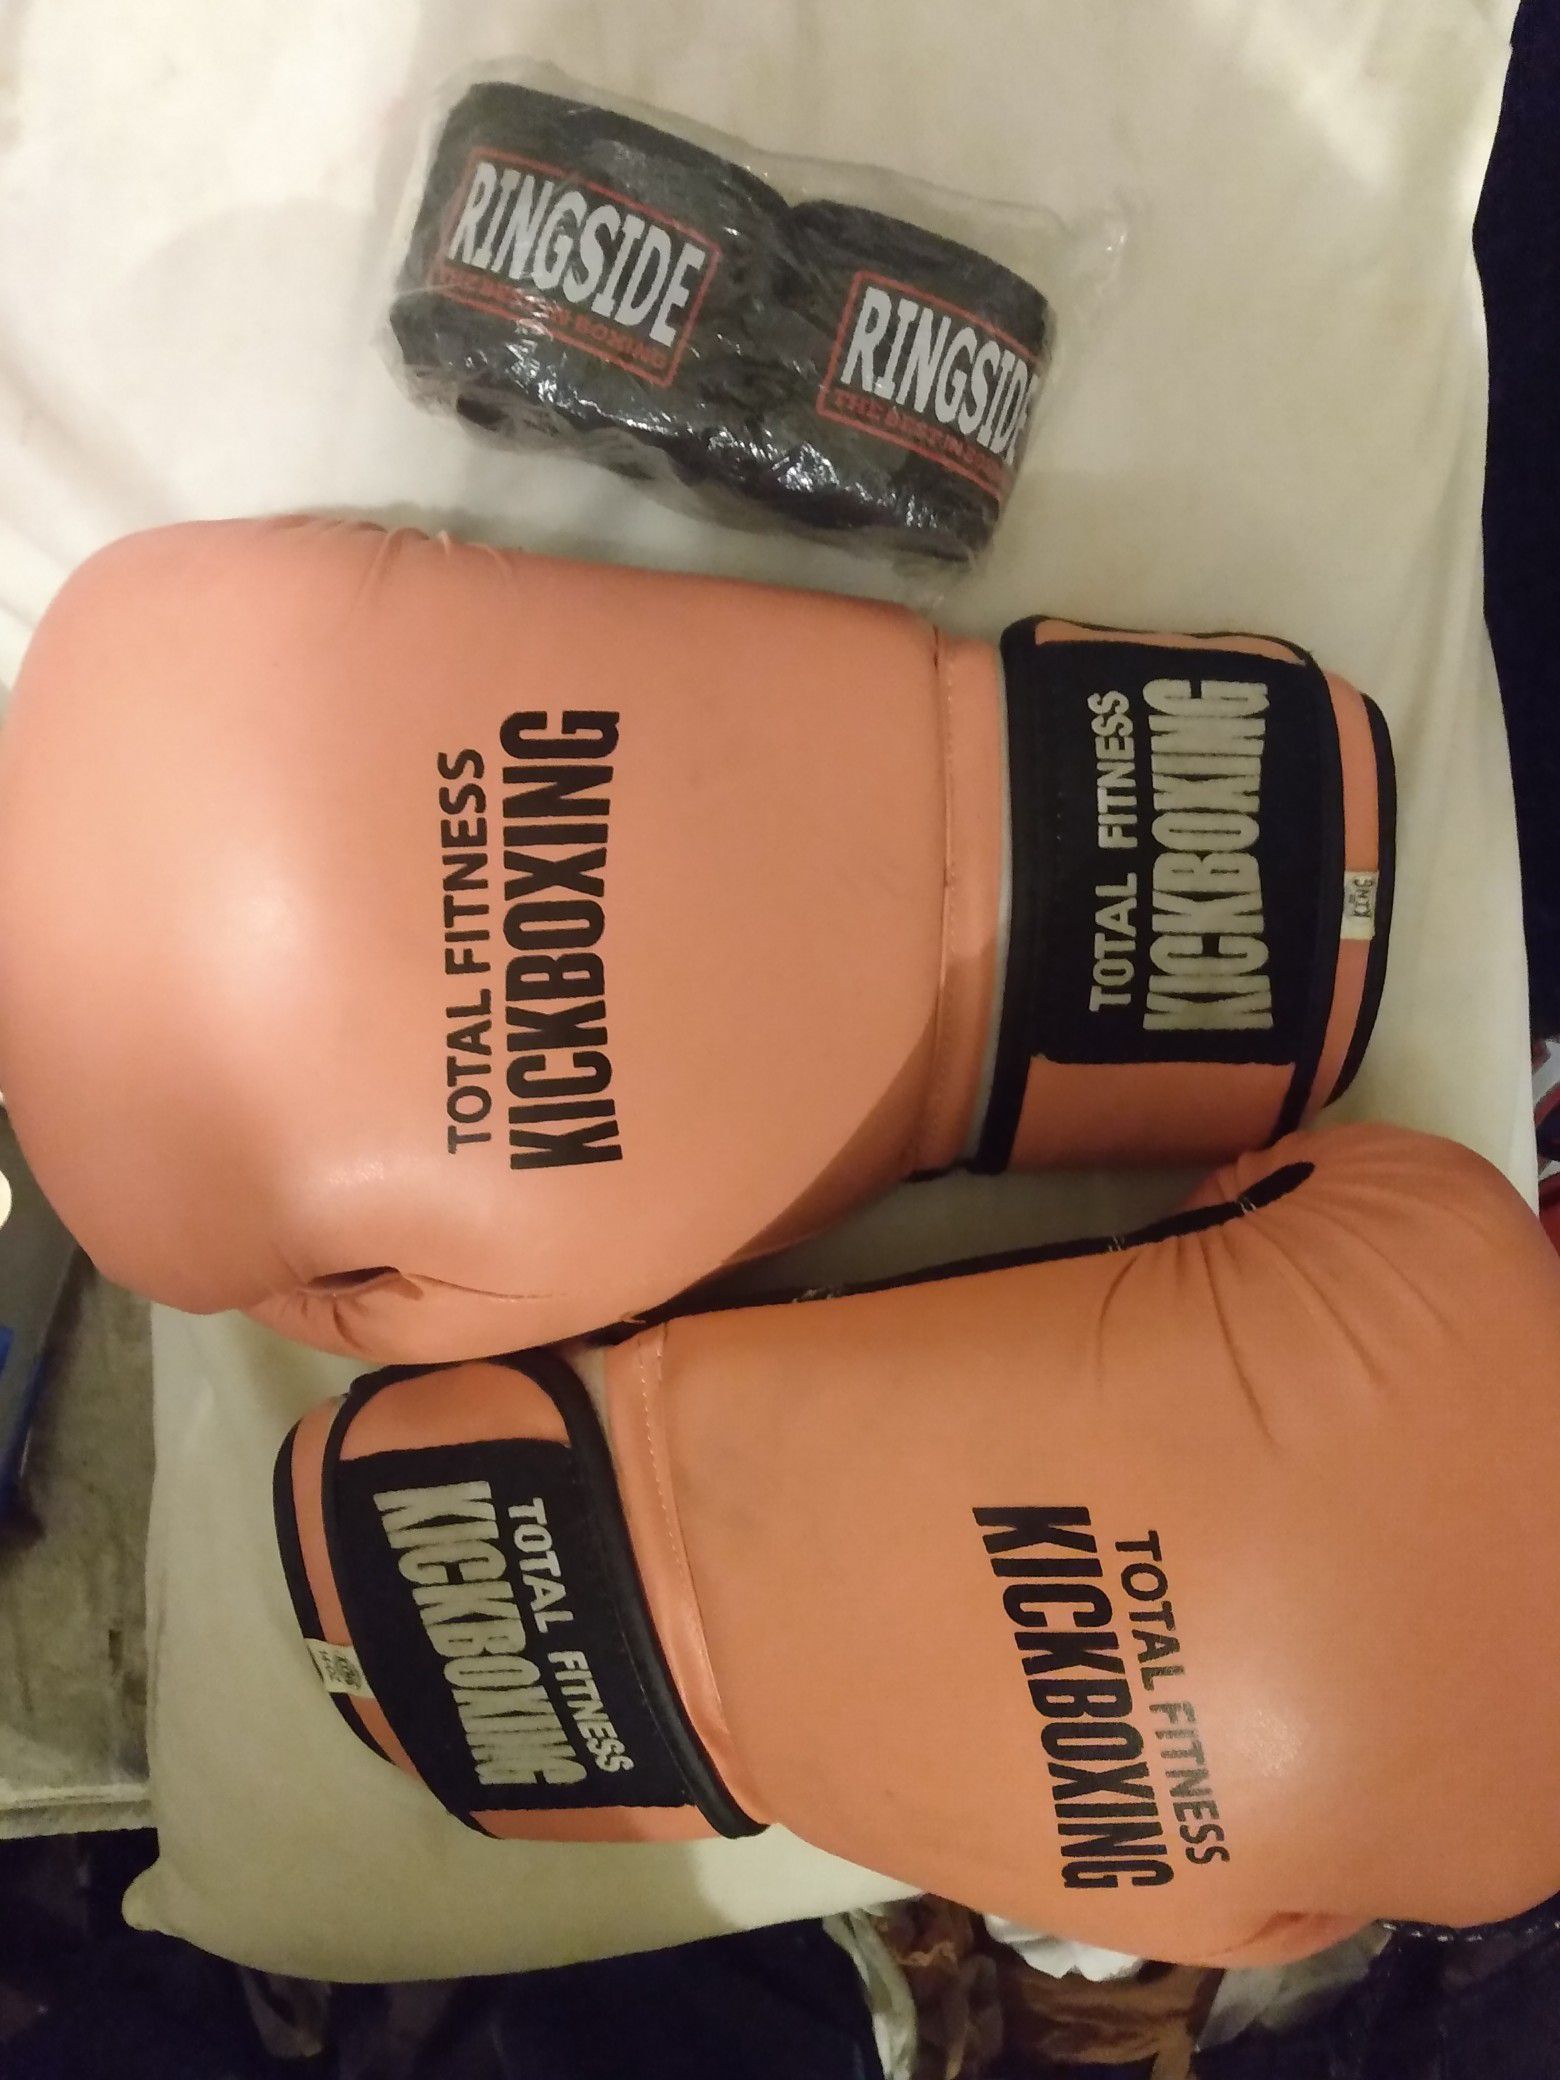 Top king 14oz kickboxing gloves and new ringside hand wraps